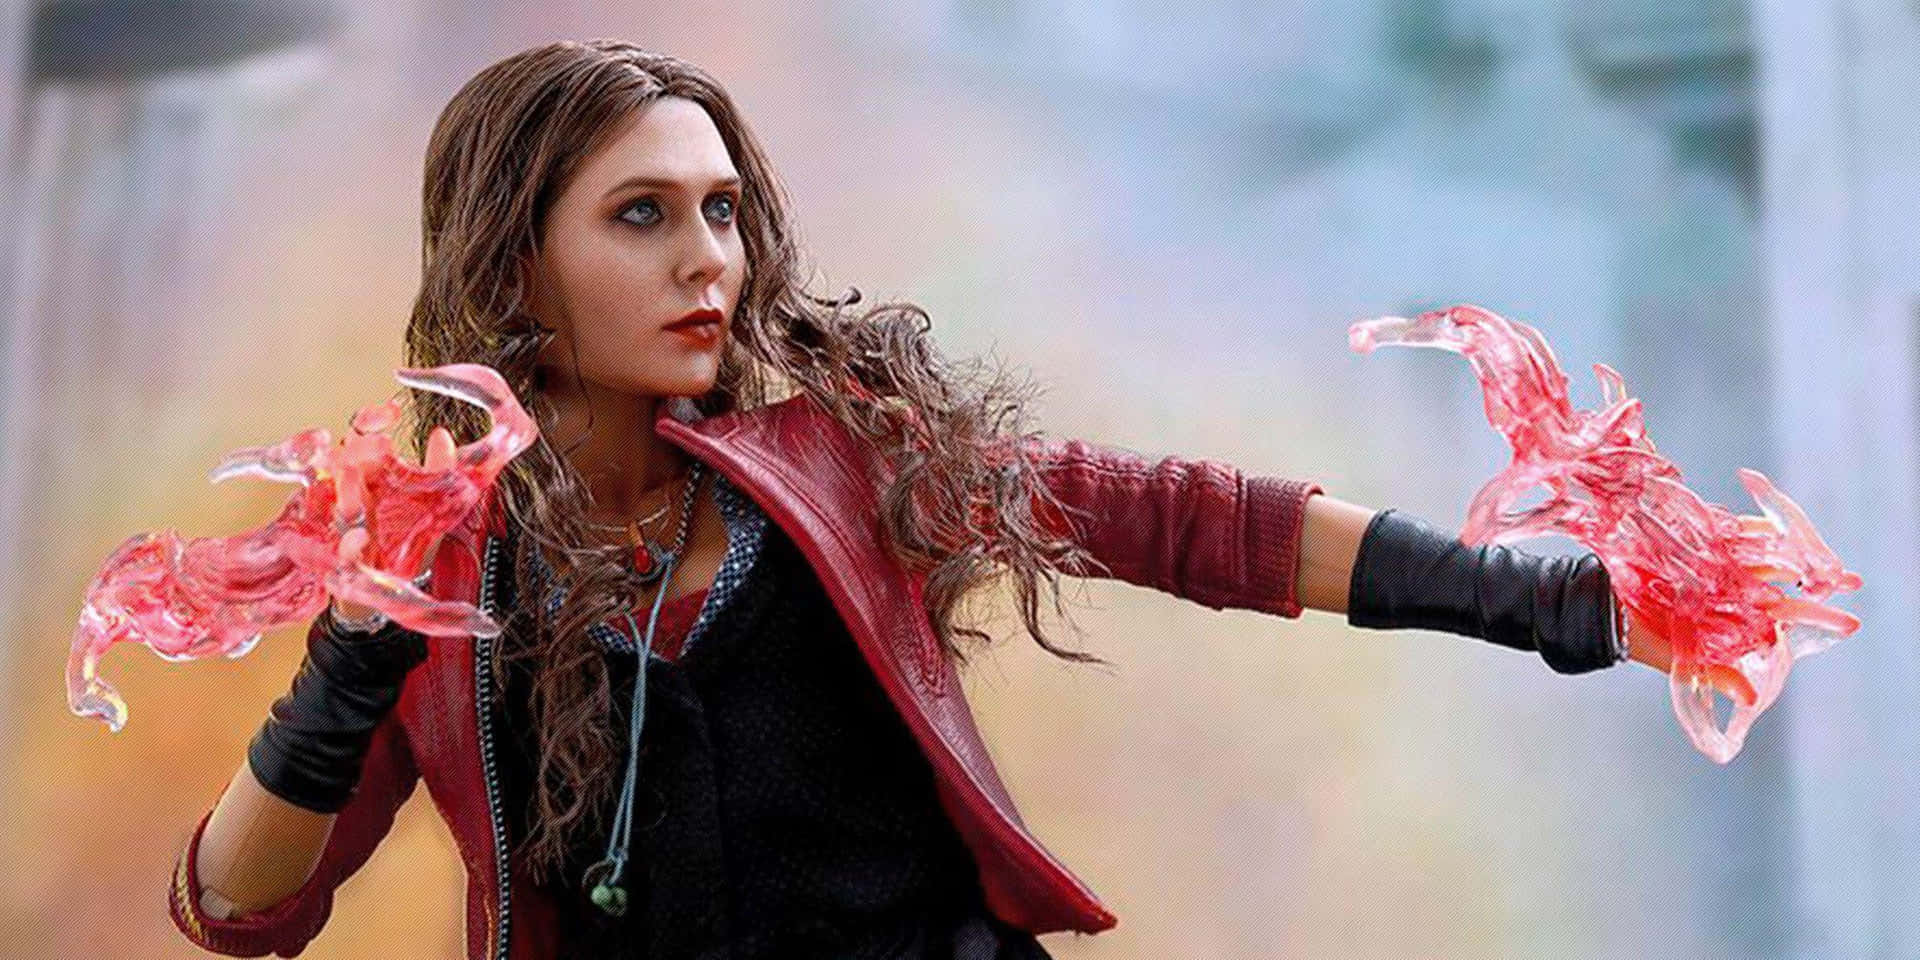 Scarlet Witch takes control of the world with her impressive magical powers! Wallpaper